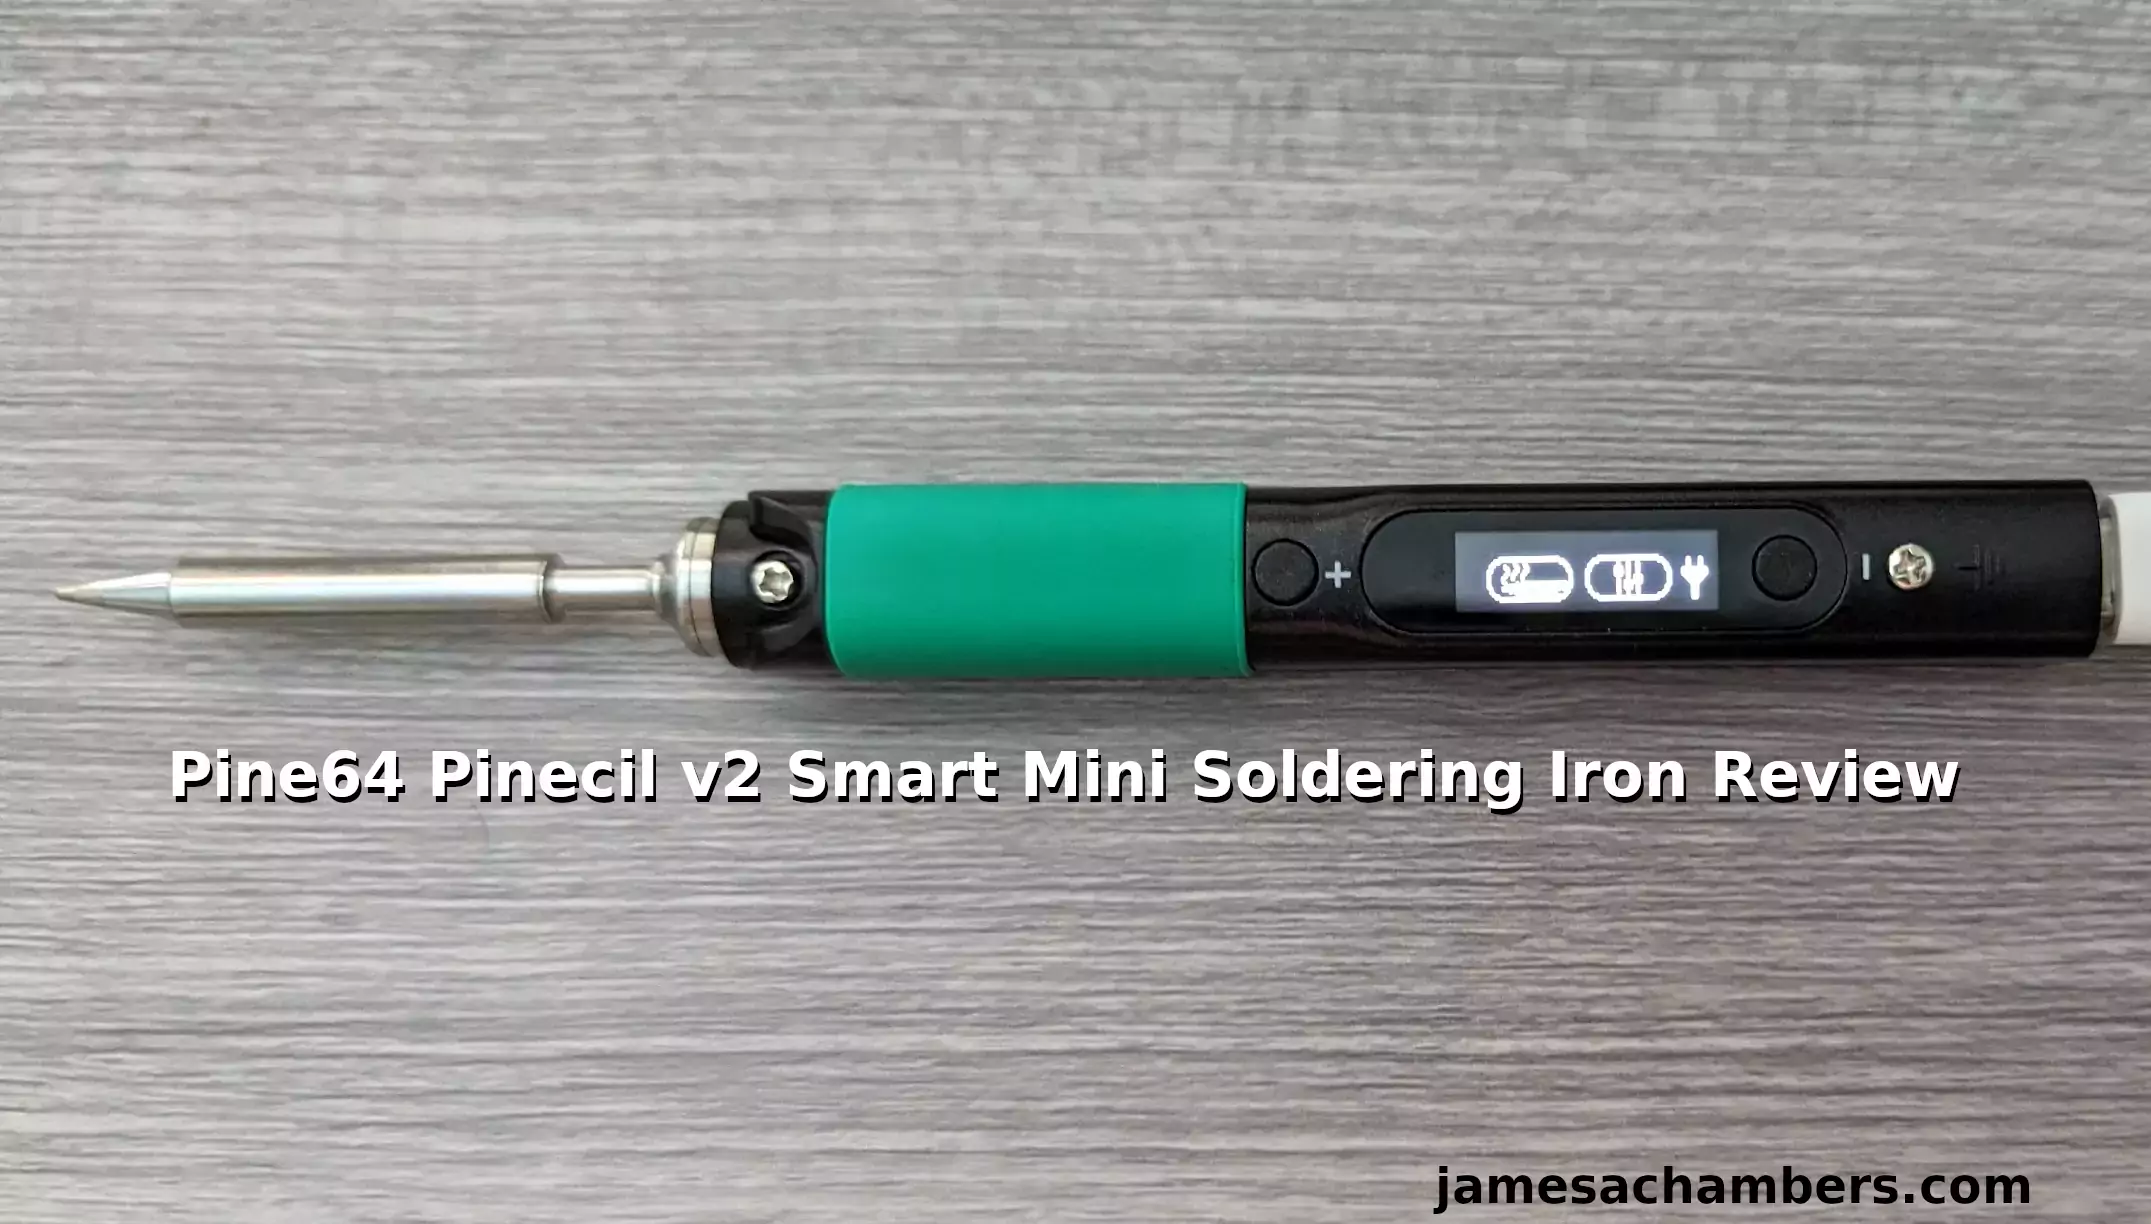 Pine64 Pinecil Mini Soldering Iron Review